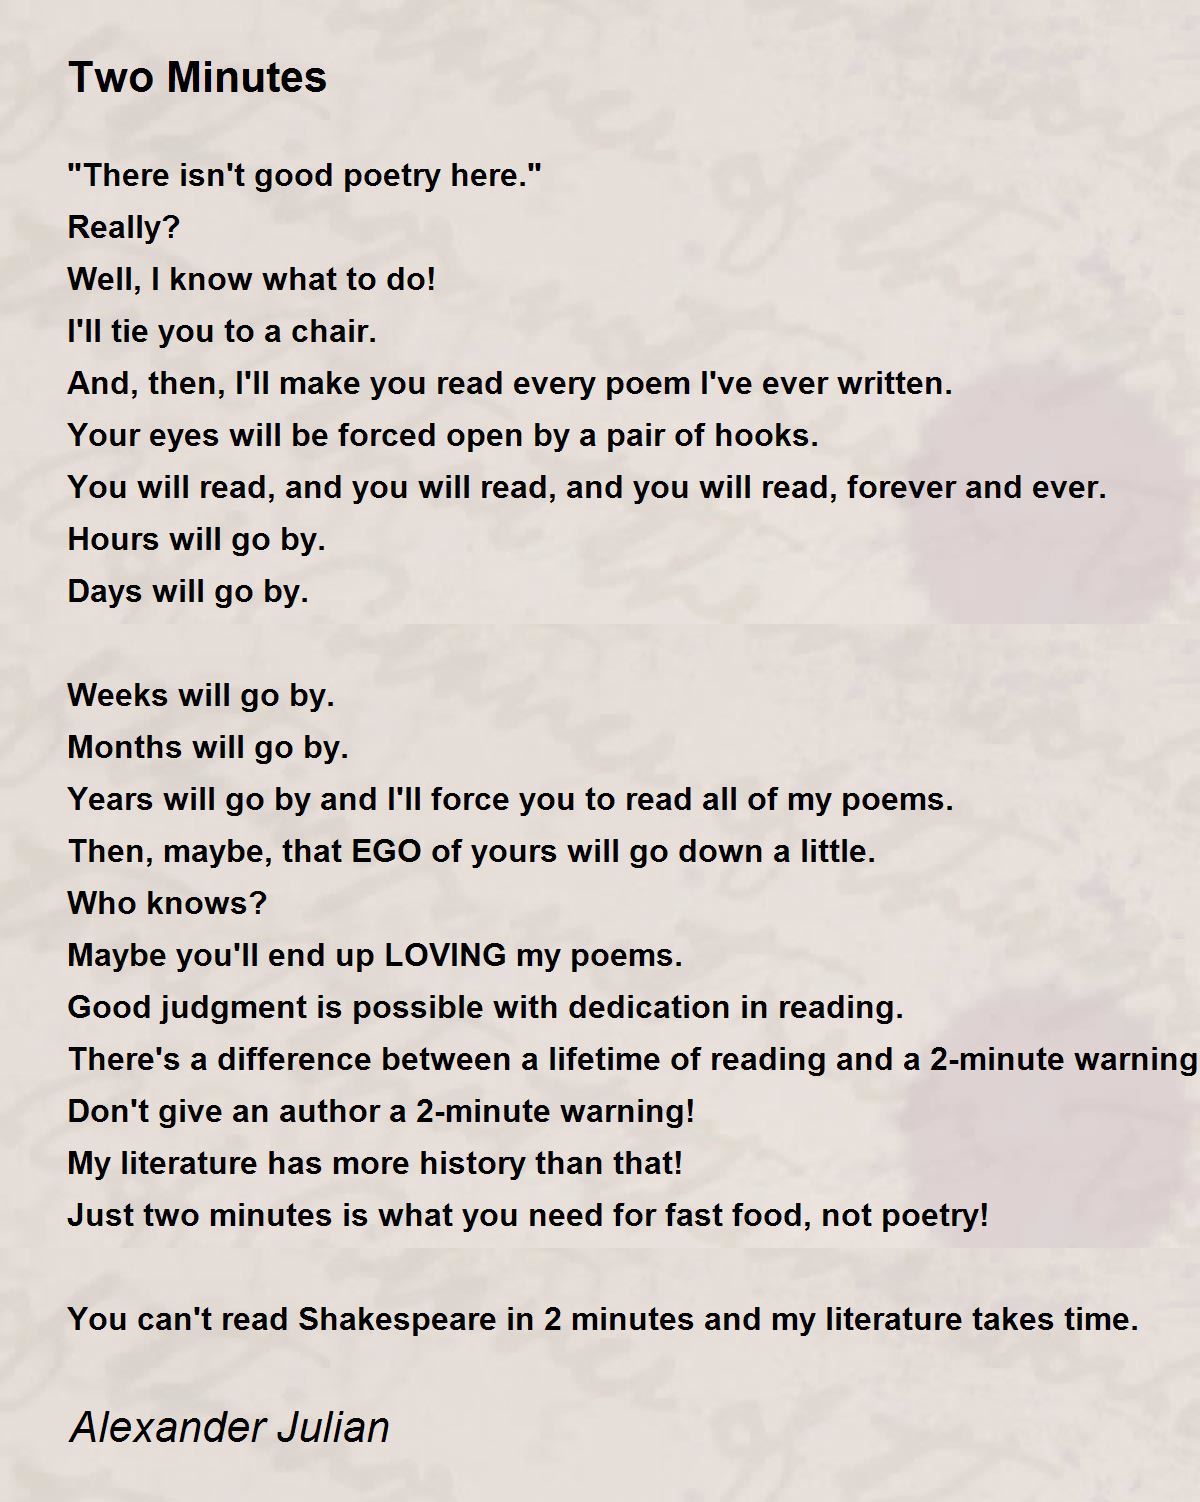 Two Minutes - Two Minutes Poem by Alexander Julian